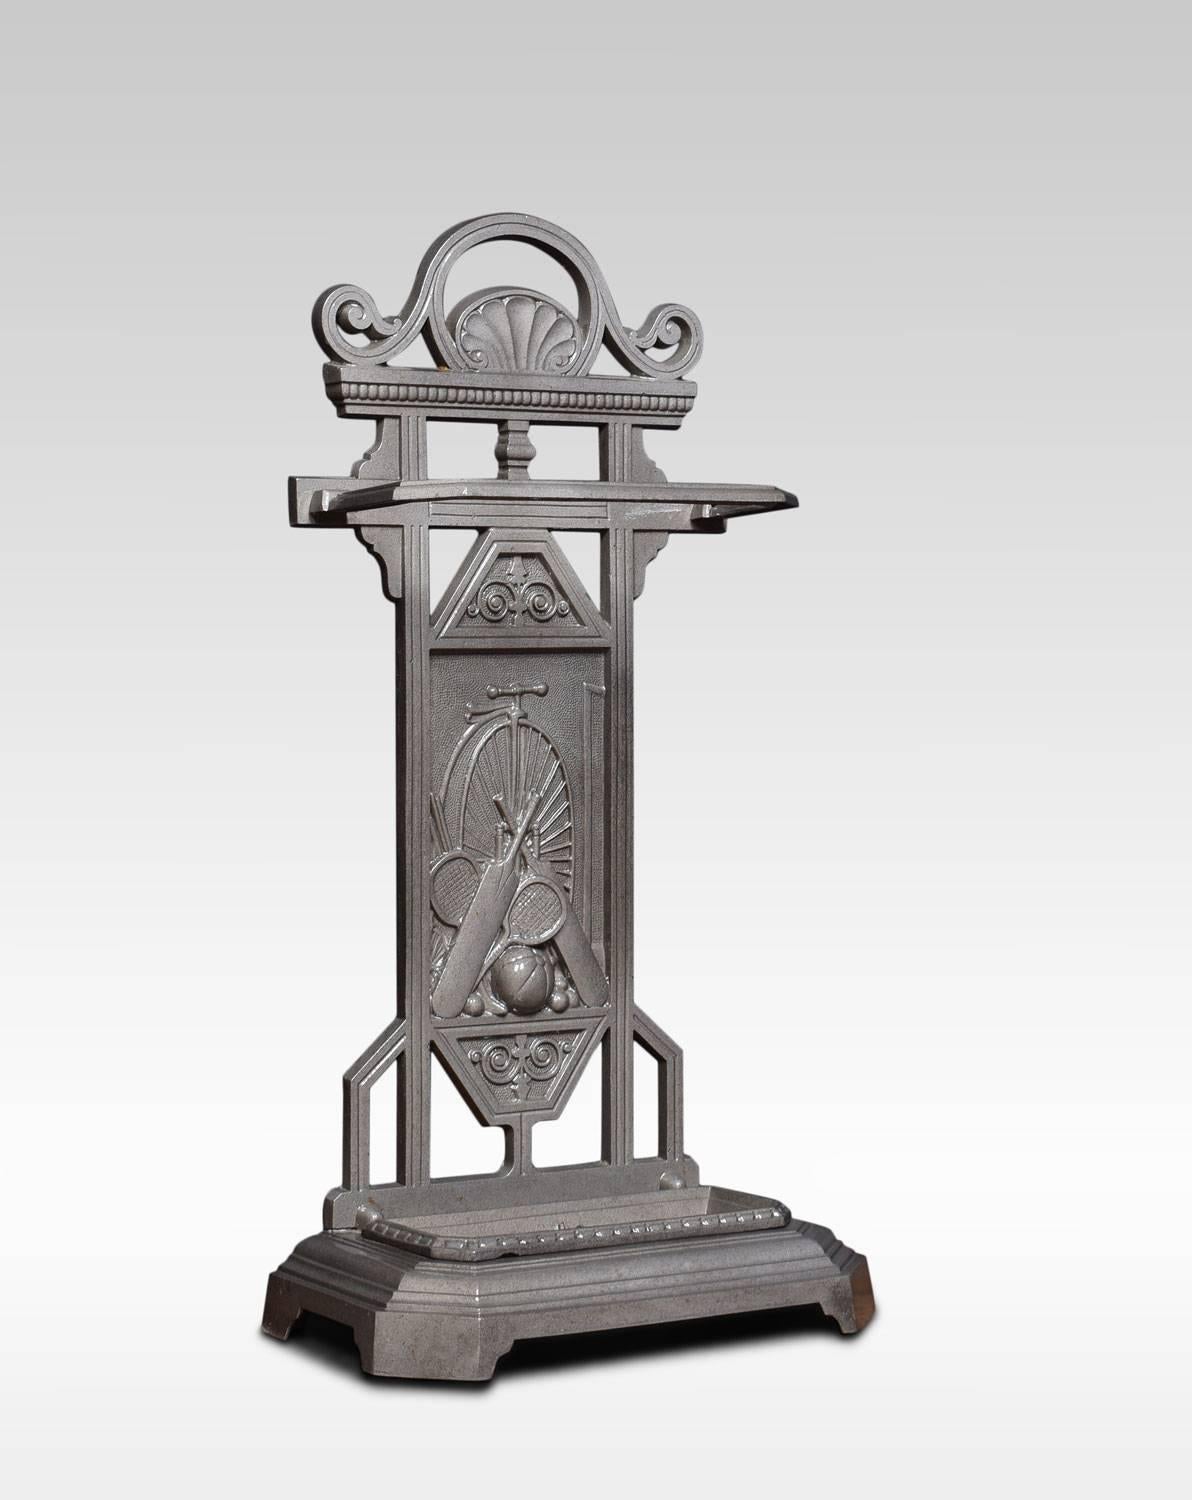 19th century cast iron stick or umbrella stand, the back plate with sporting motif and penny farthing in background. All raised up on plinth base incorporating original drip trays. The manner reminiscent of Thomas Jekyll.
Dimensions:
Height 30.5